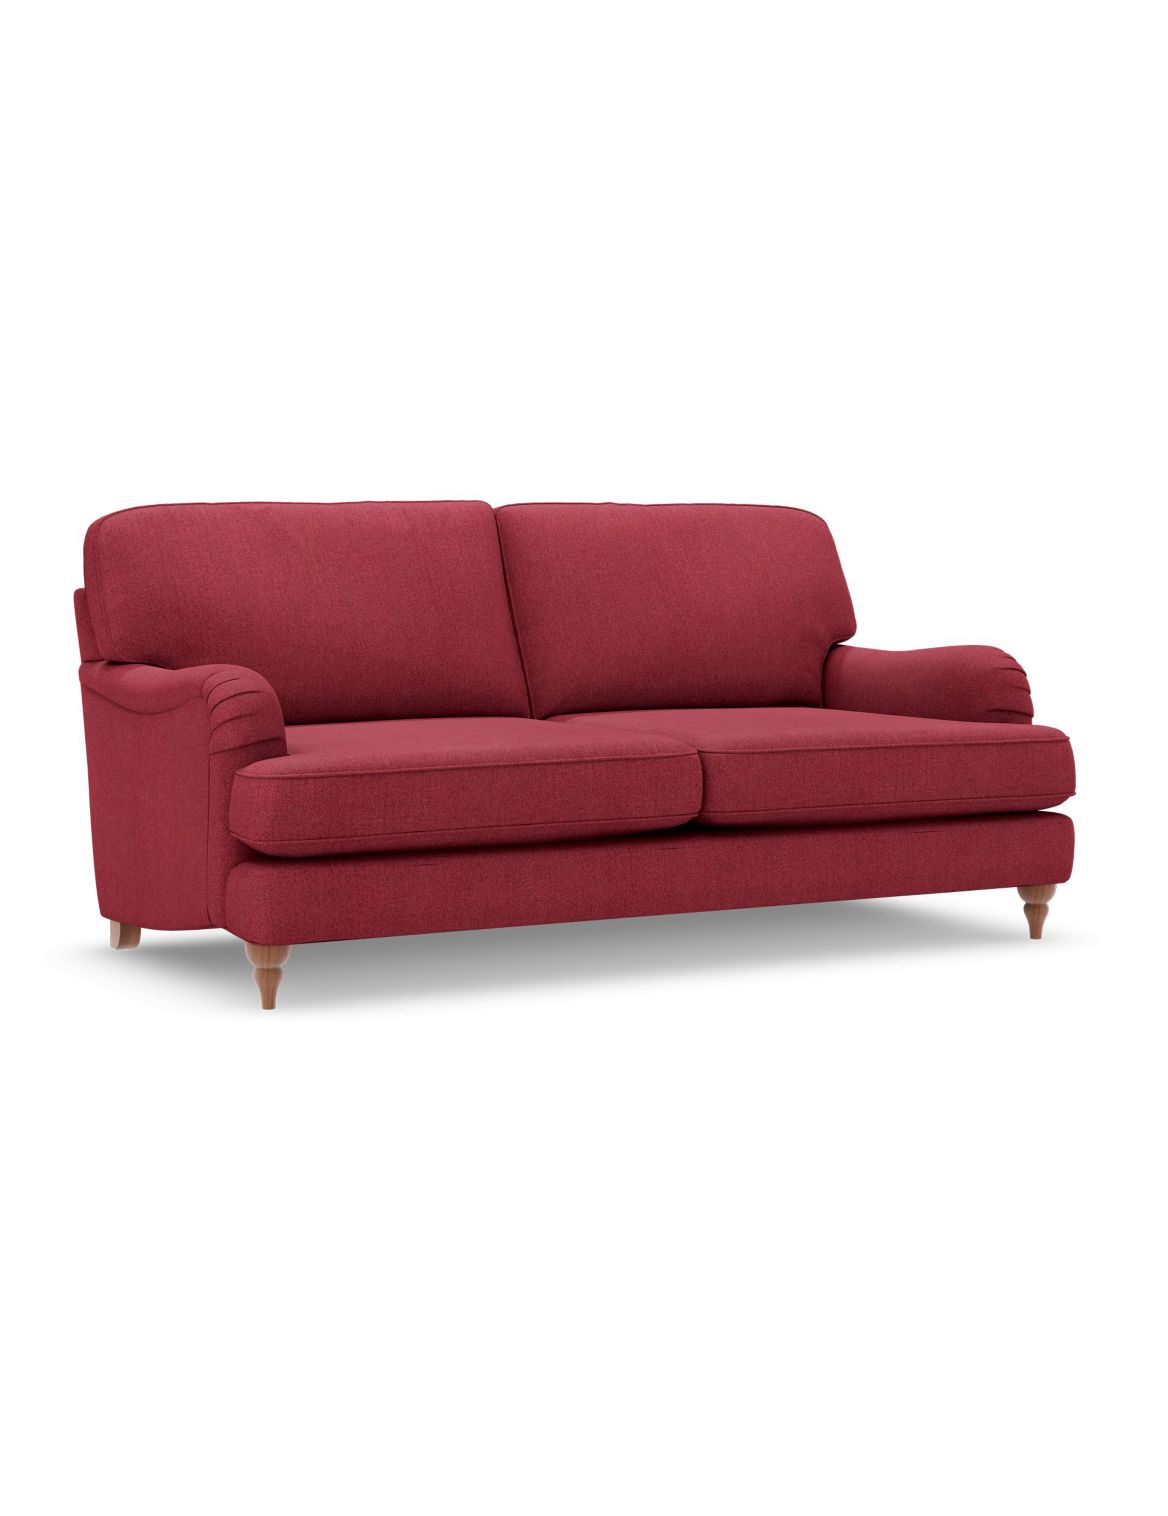 Rochester Large Sofa red